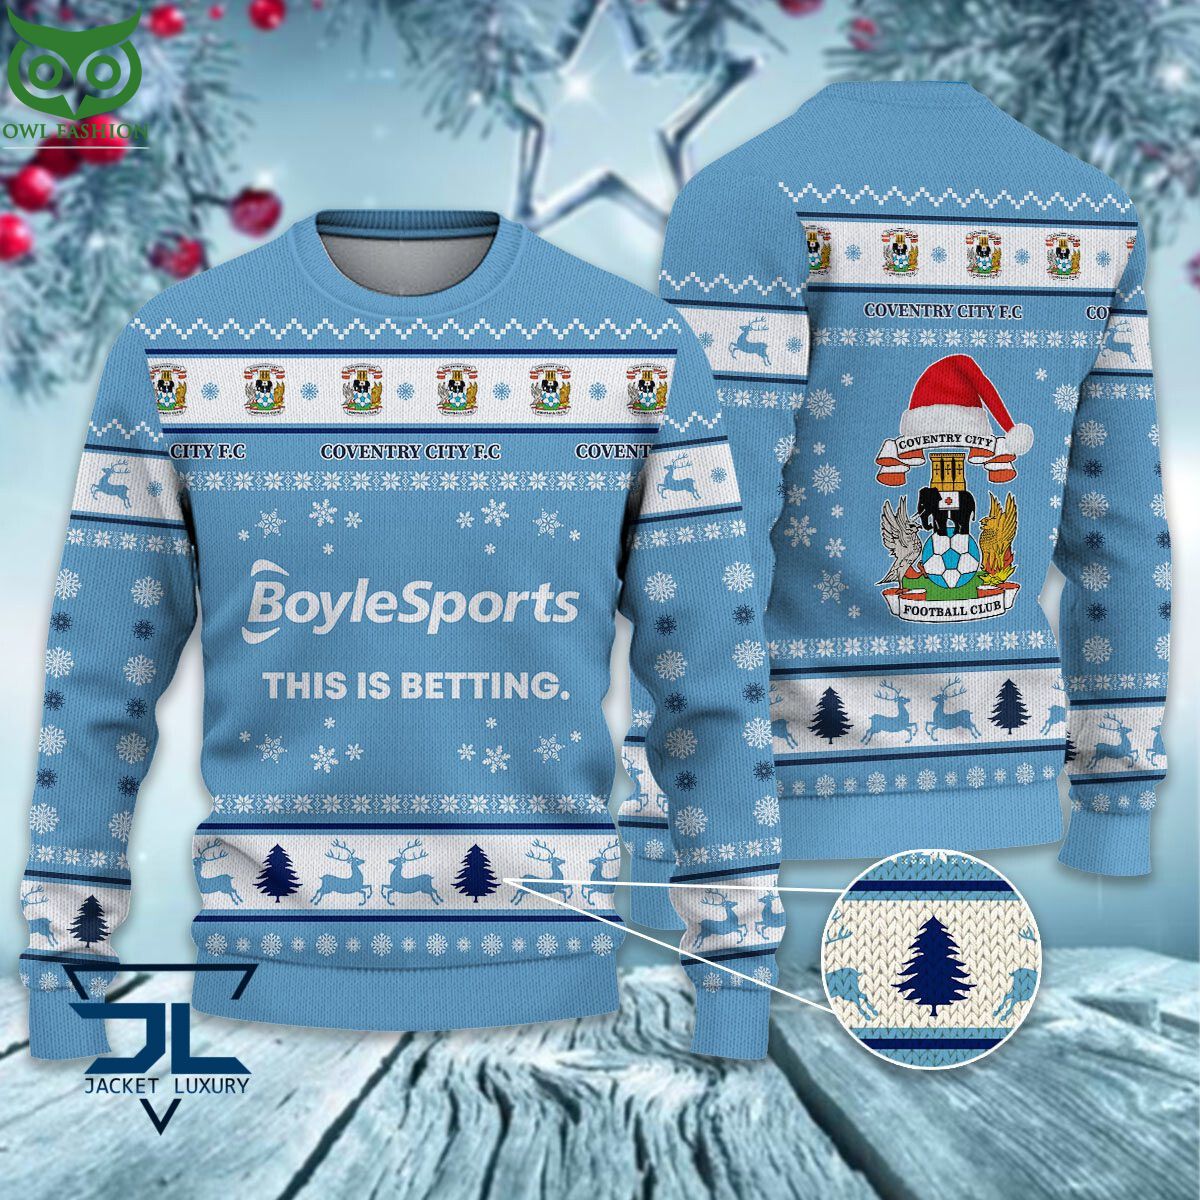 trending coventry city f c epl league cup new ugly sweater 1 kfCFW.jpg